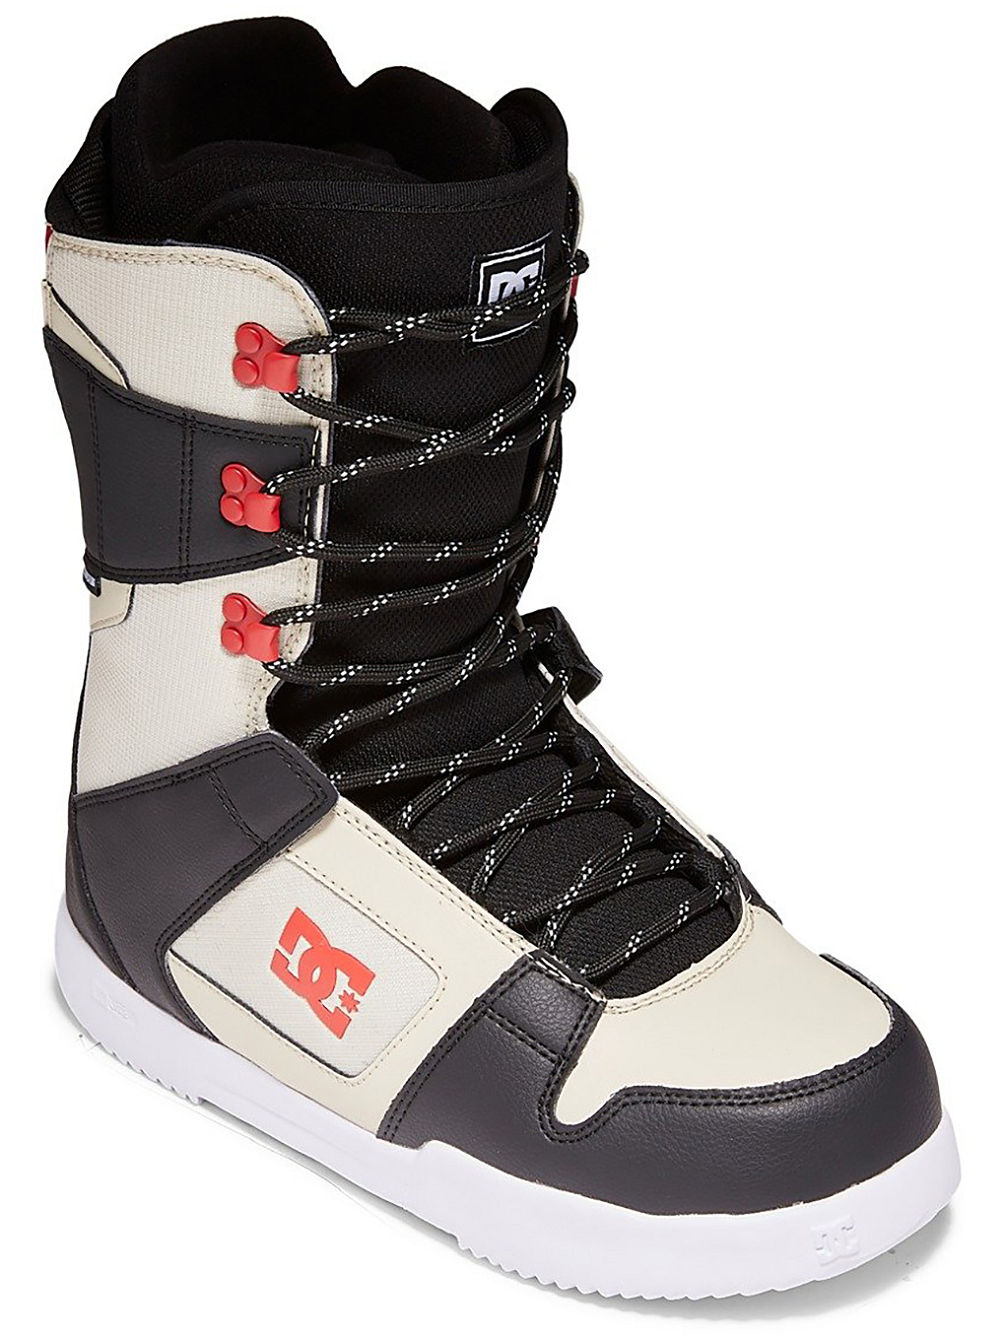 Phase 2022 Snowboard-Boots